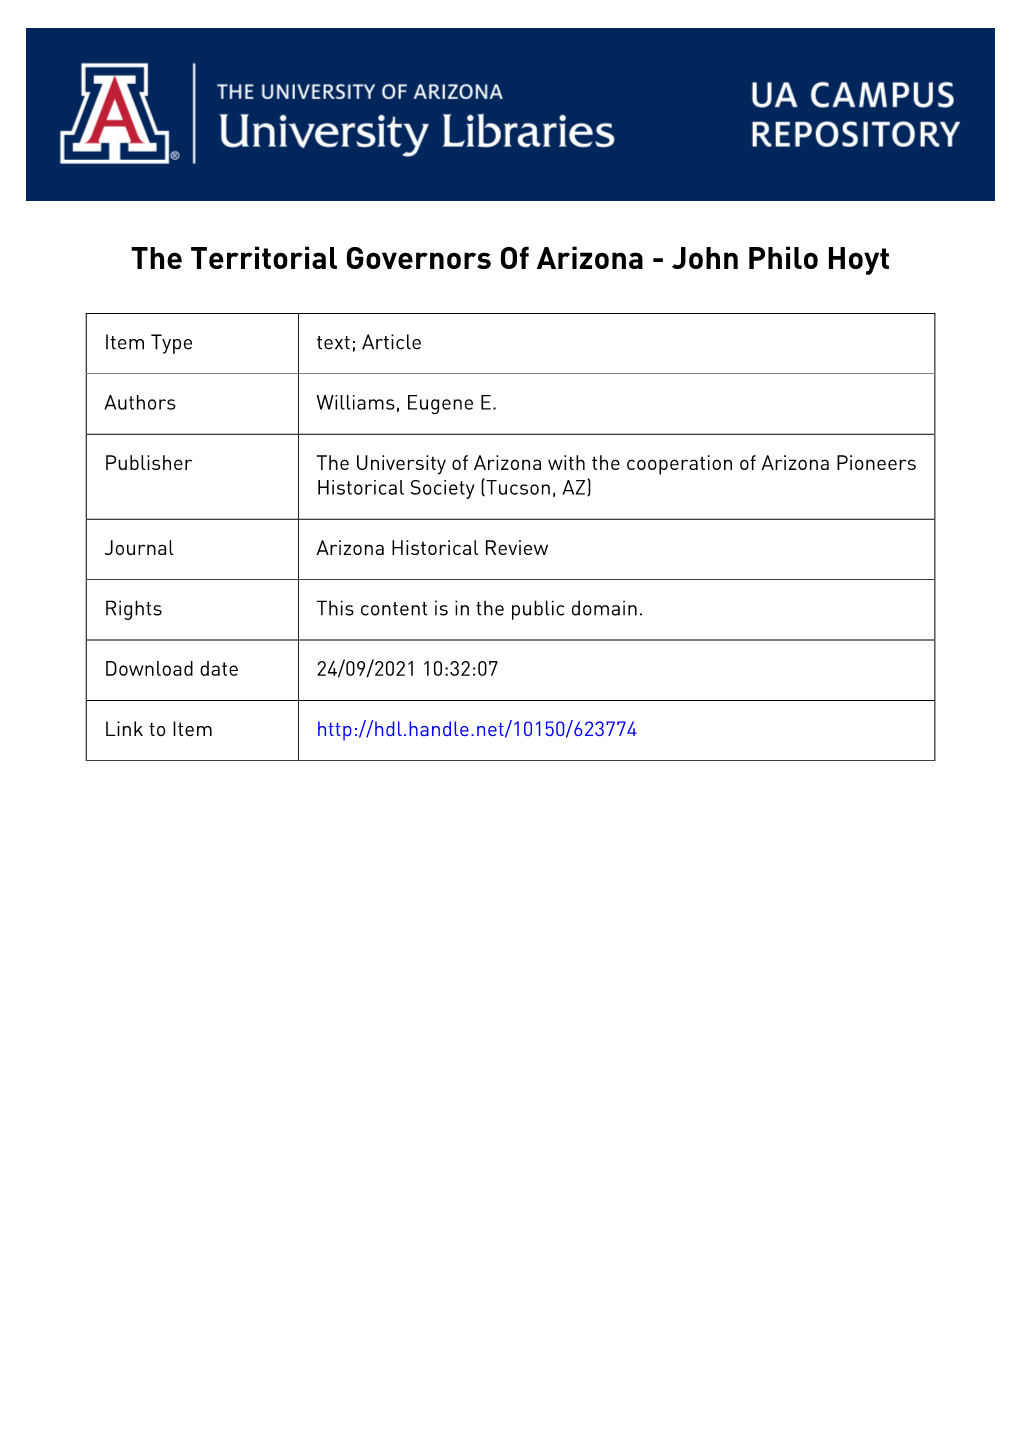 The Territorial Governors of Arizona by Eugene E